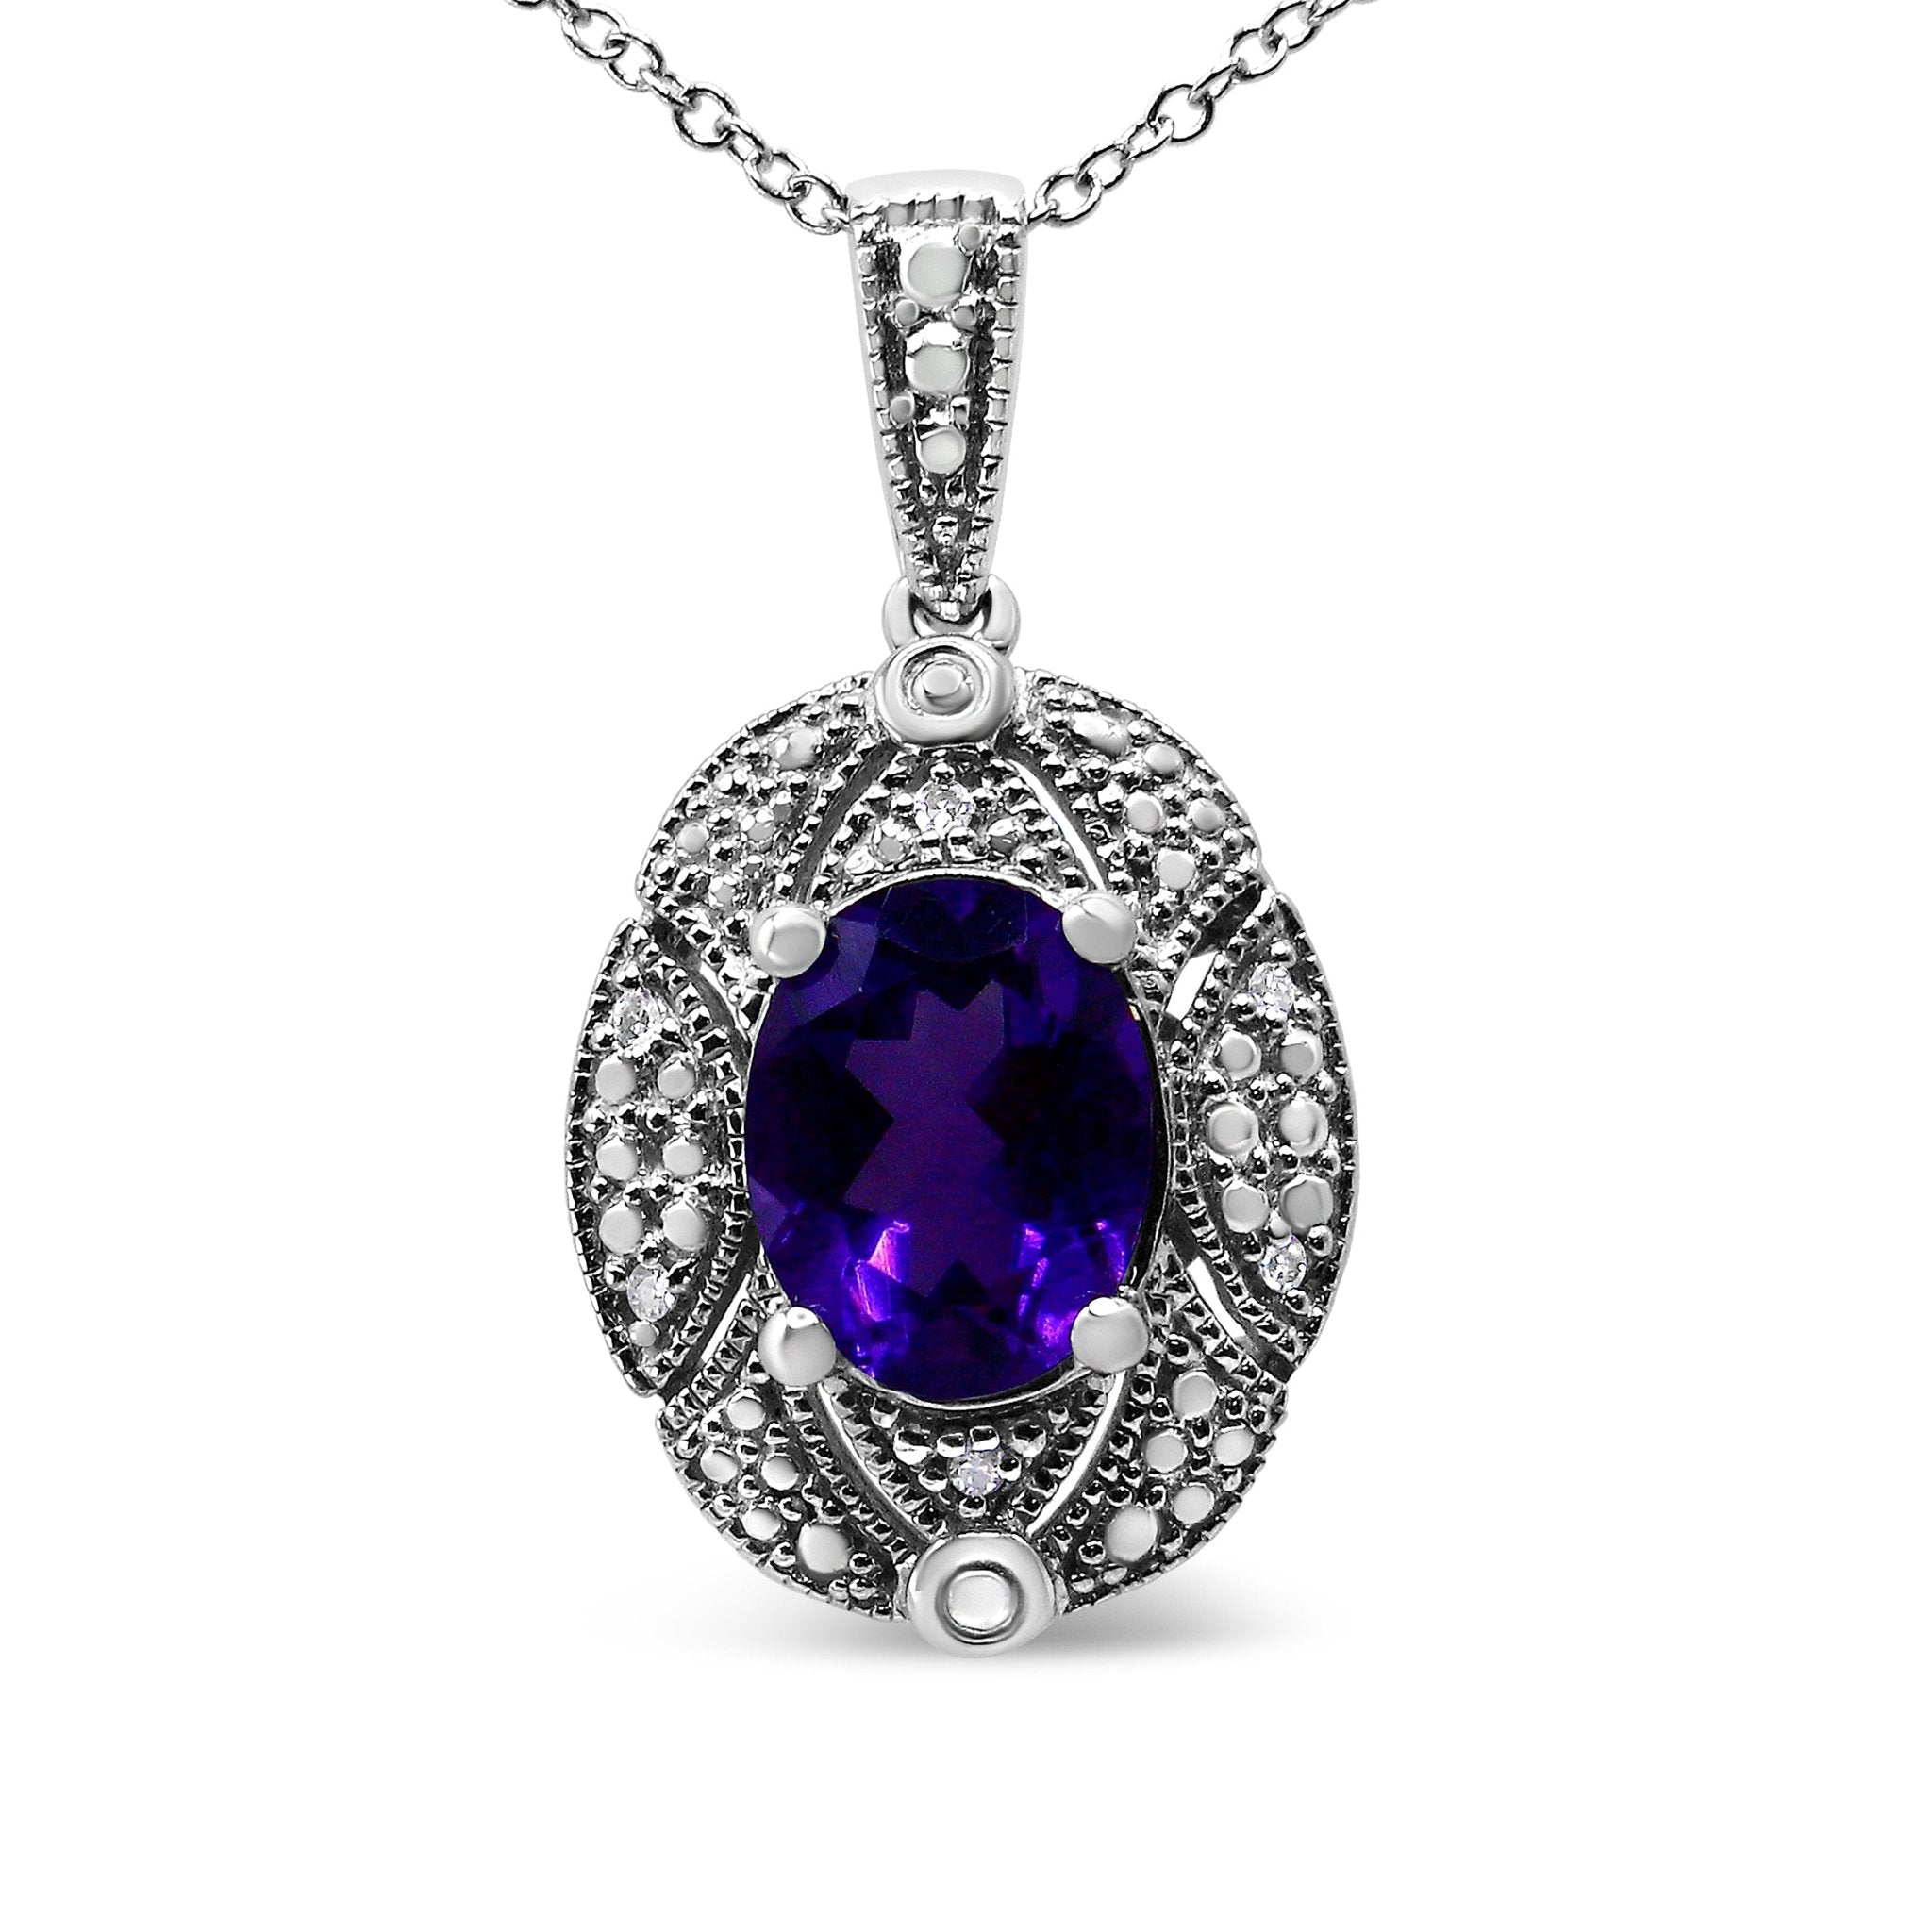 .925 Sterling Silver Diamond Accent And 9X7mm Purple Oval Amethyst Gemstone Pendant 18" Necklace (I-J Color, I1-I2 Clarity) - Tuesday Morning-Pendant Necklace